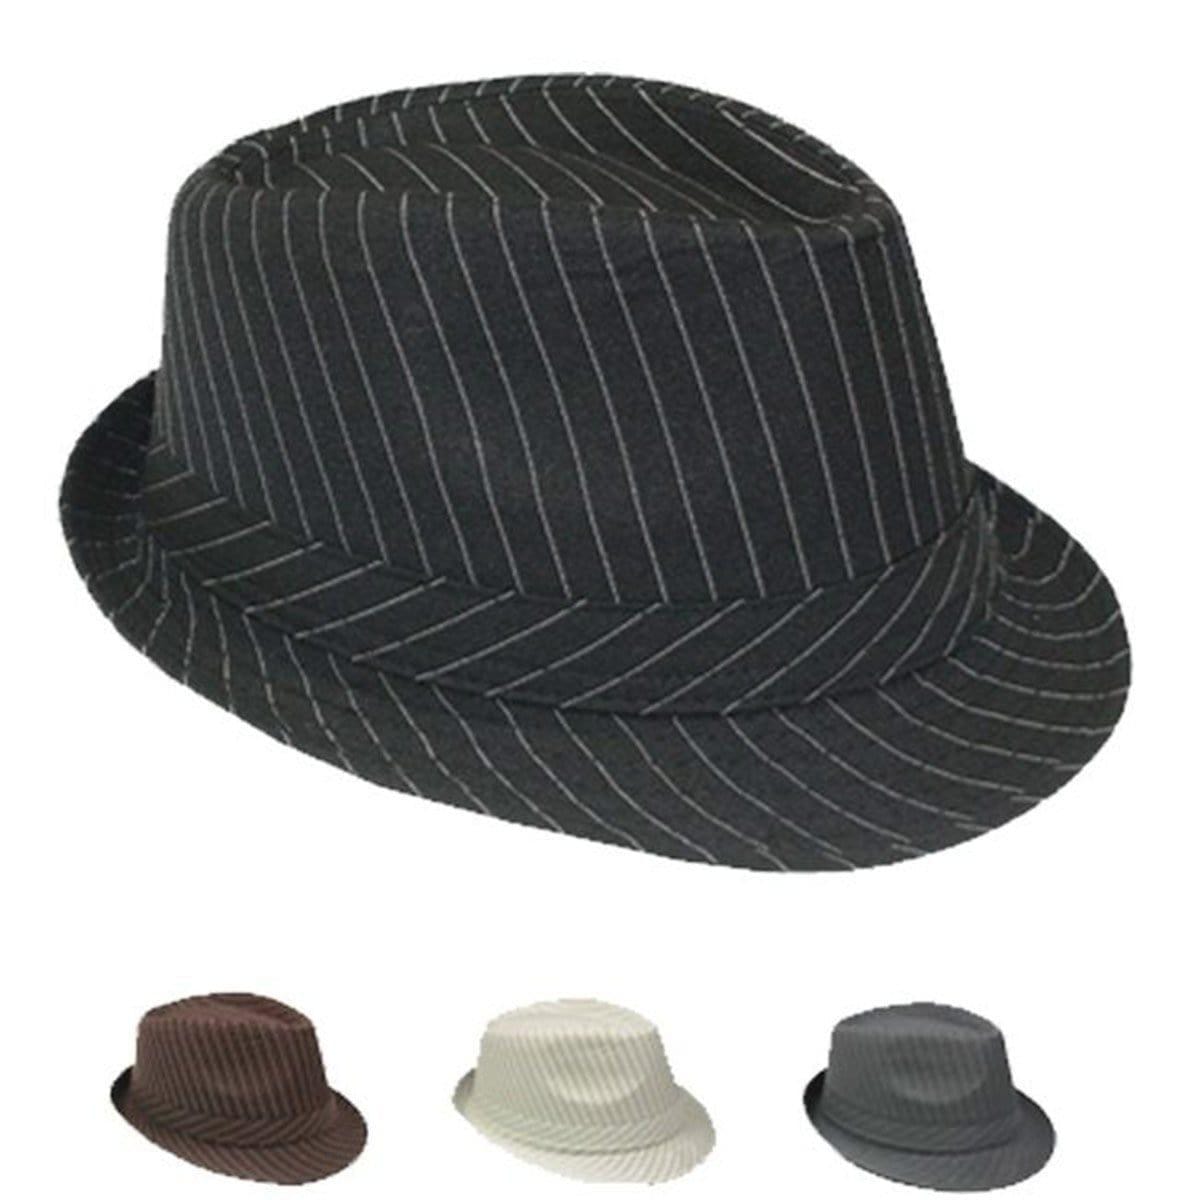 Buy Costume Accessories Gangster Fedora Hat, Assortment, 1 count sold at Party Expert